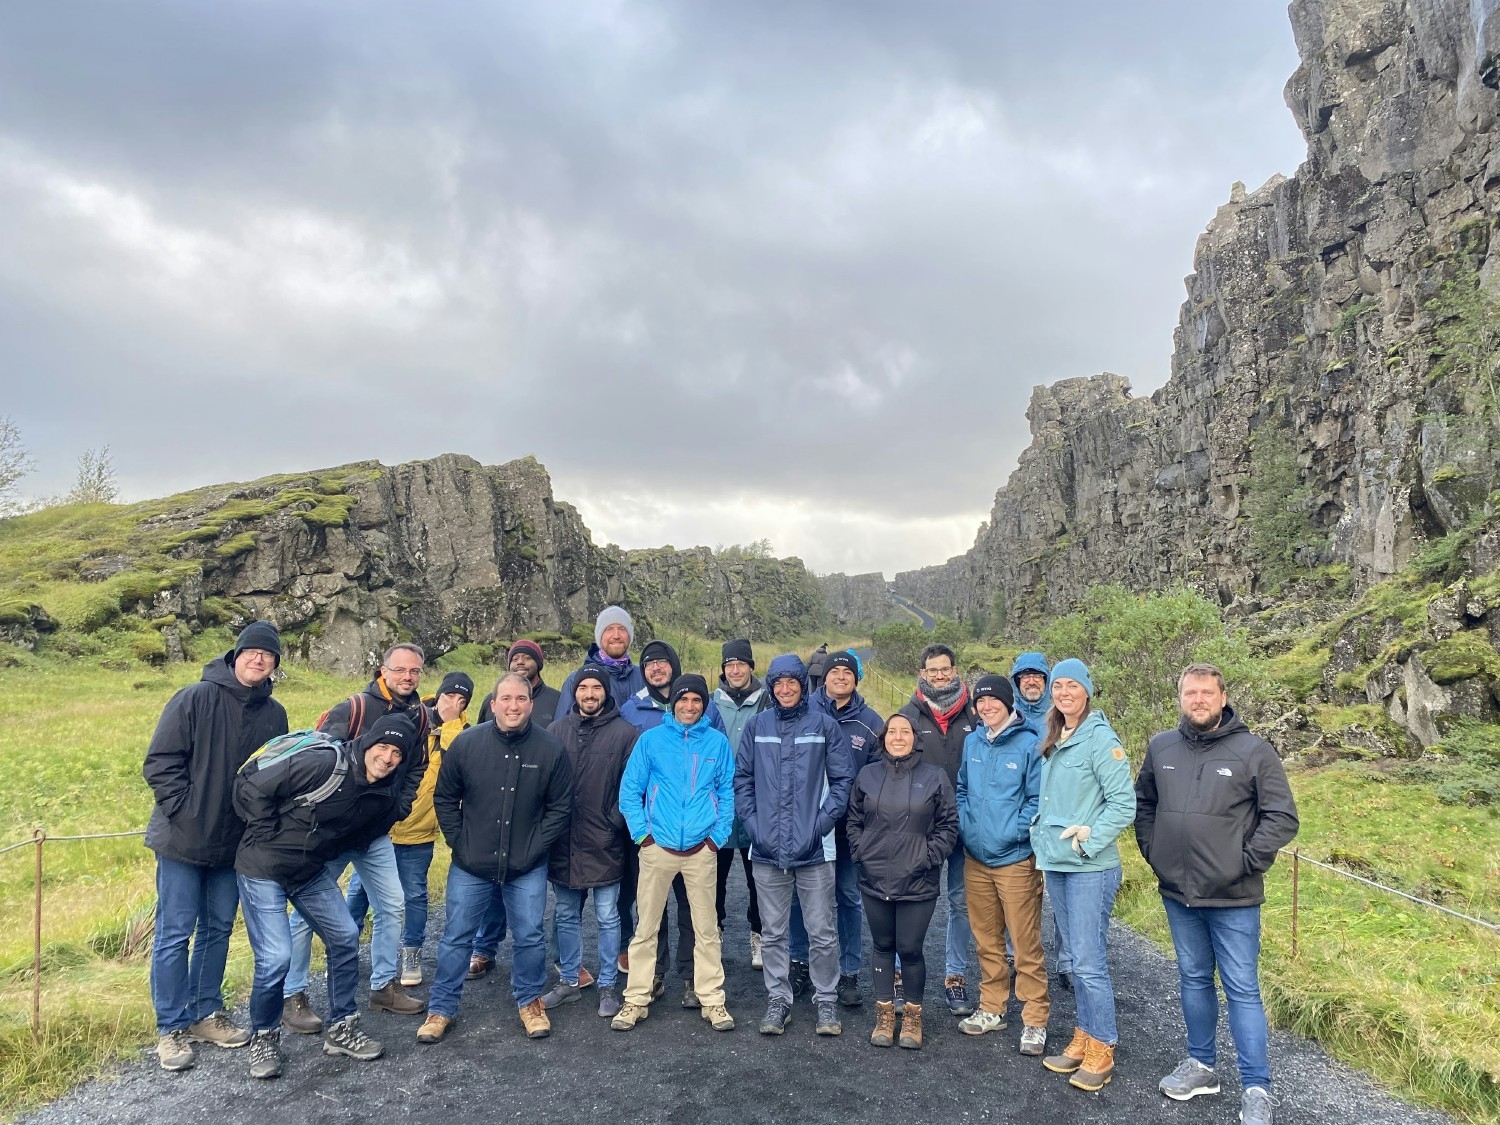 Onna's product team off-site in Iceland